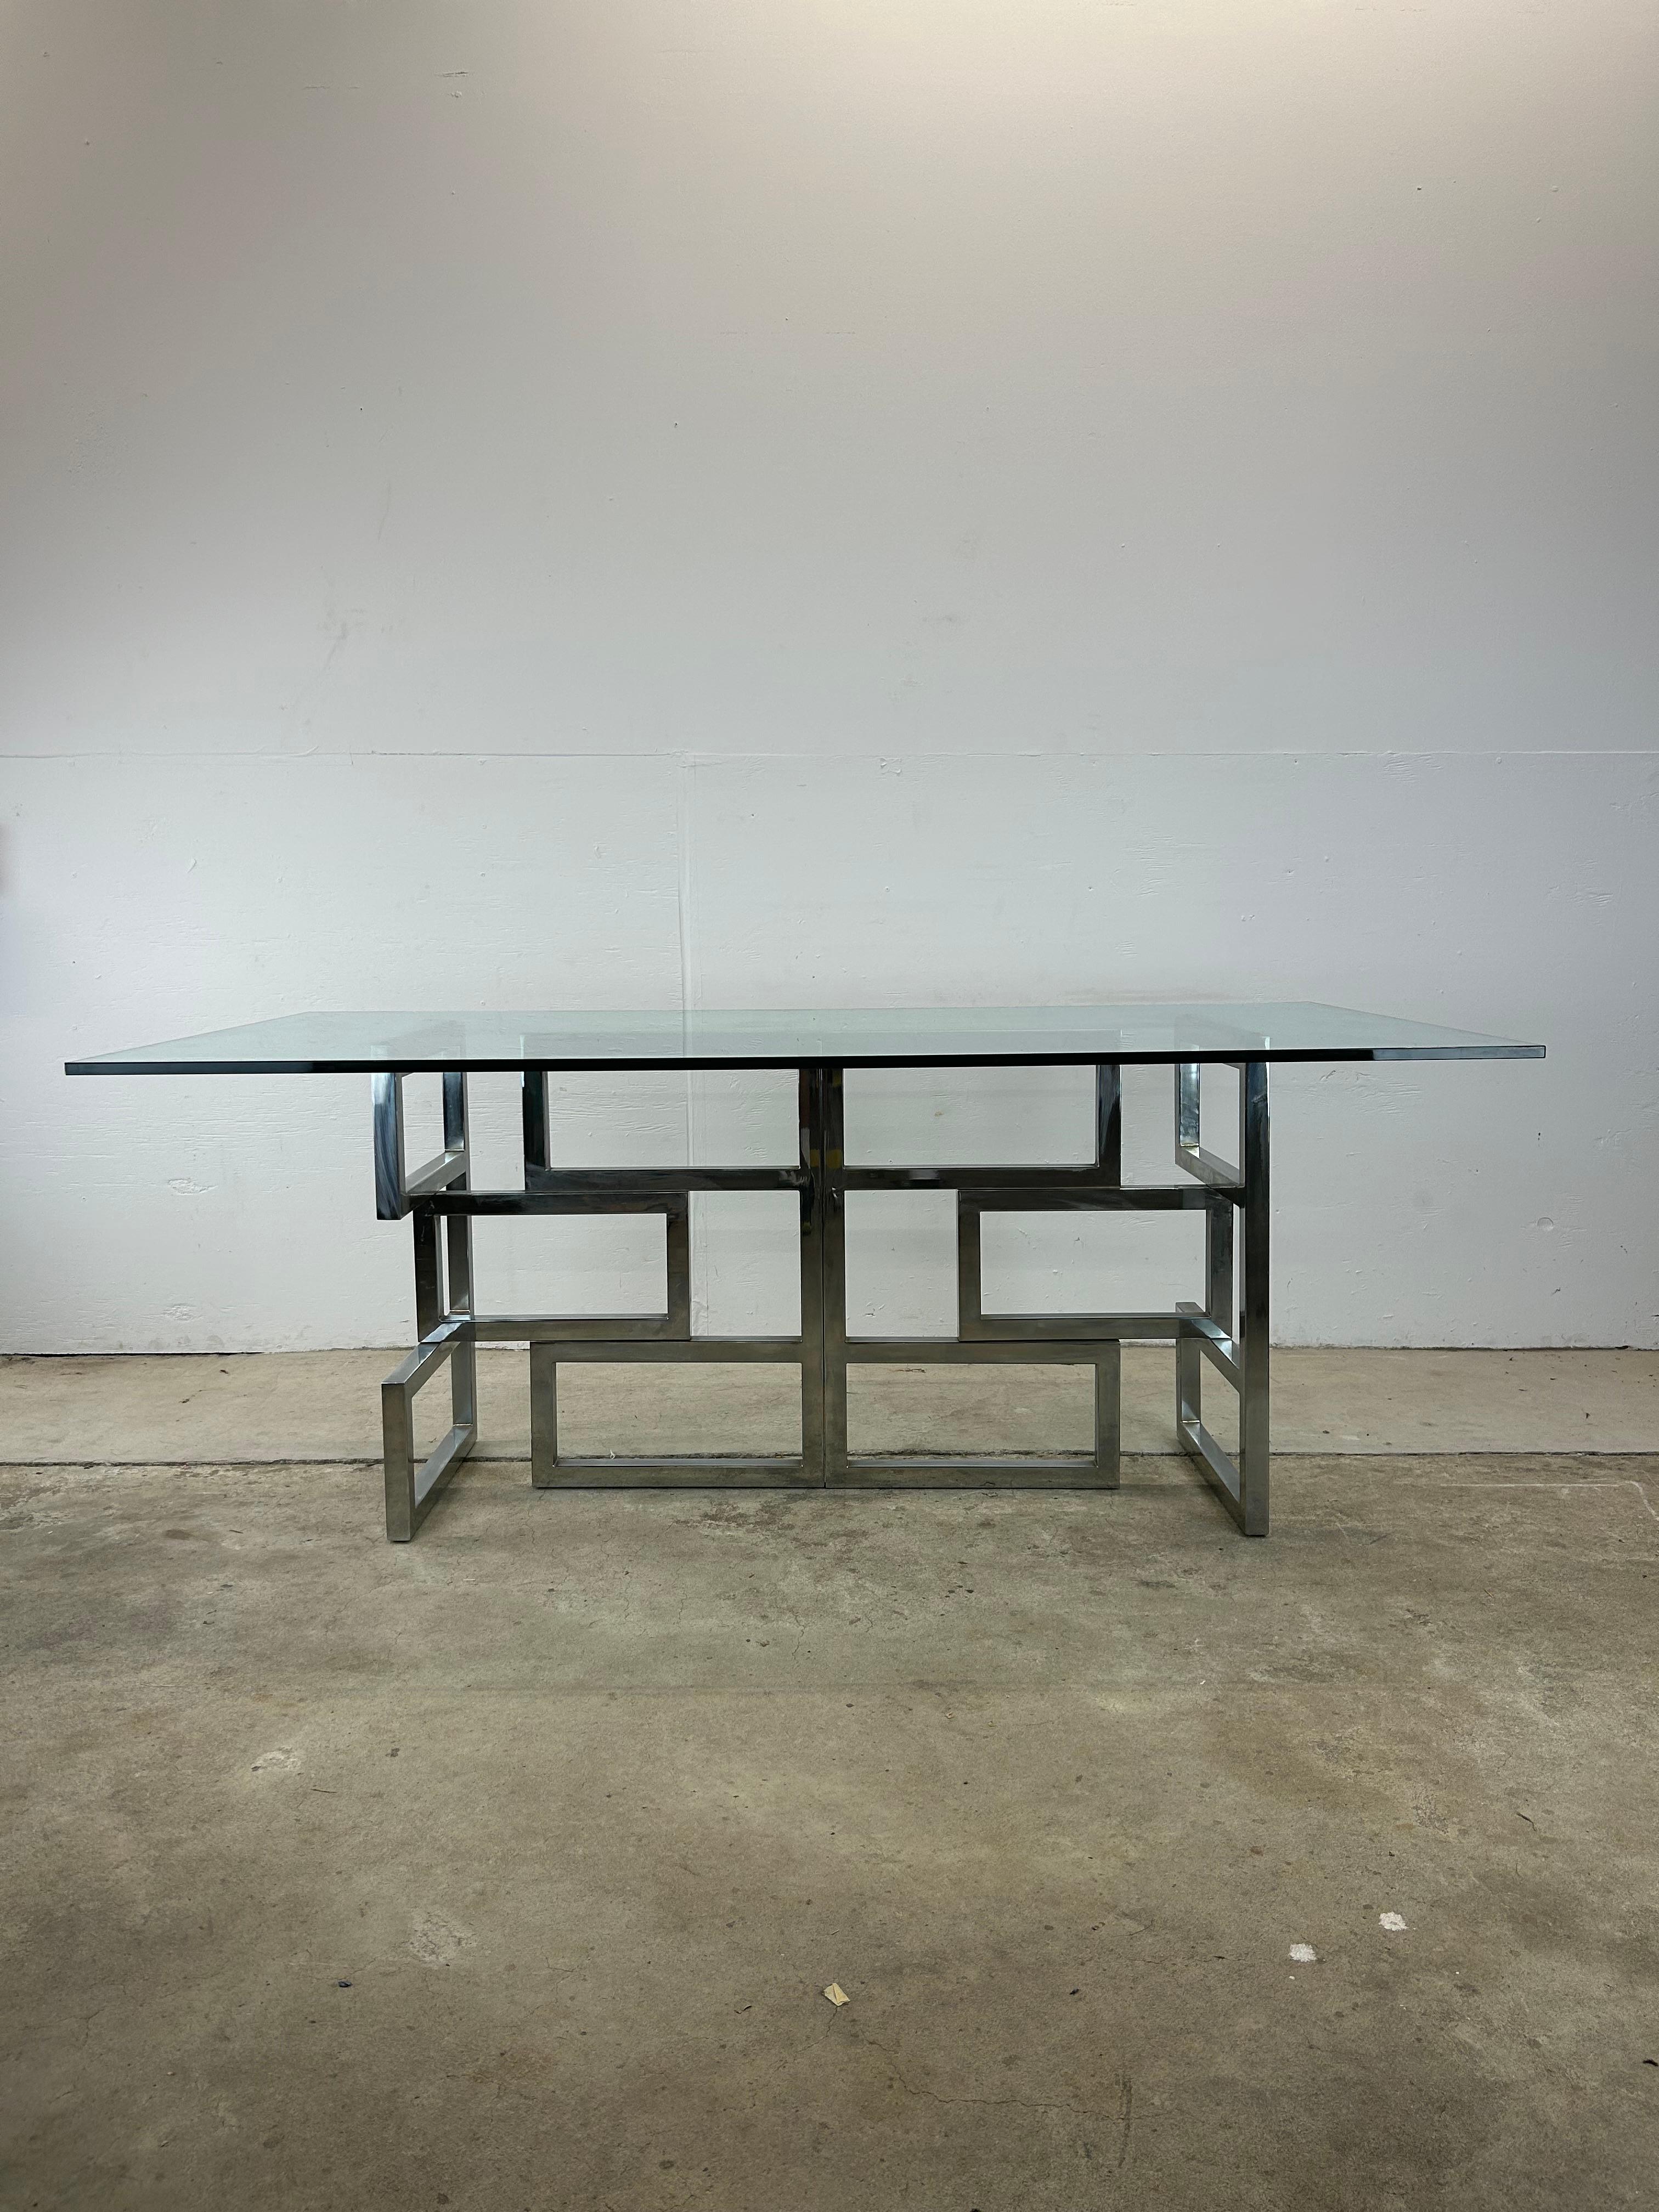 This mid century post-modern dining table features chrome base with geometric design and thick glass table top.

Complimentary post-modern dining chairs available separately. 

Dimensions: 72w 39d 29h 38 knee h

Condition: Chrome base is in